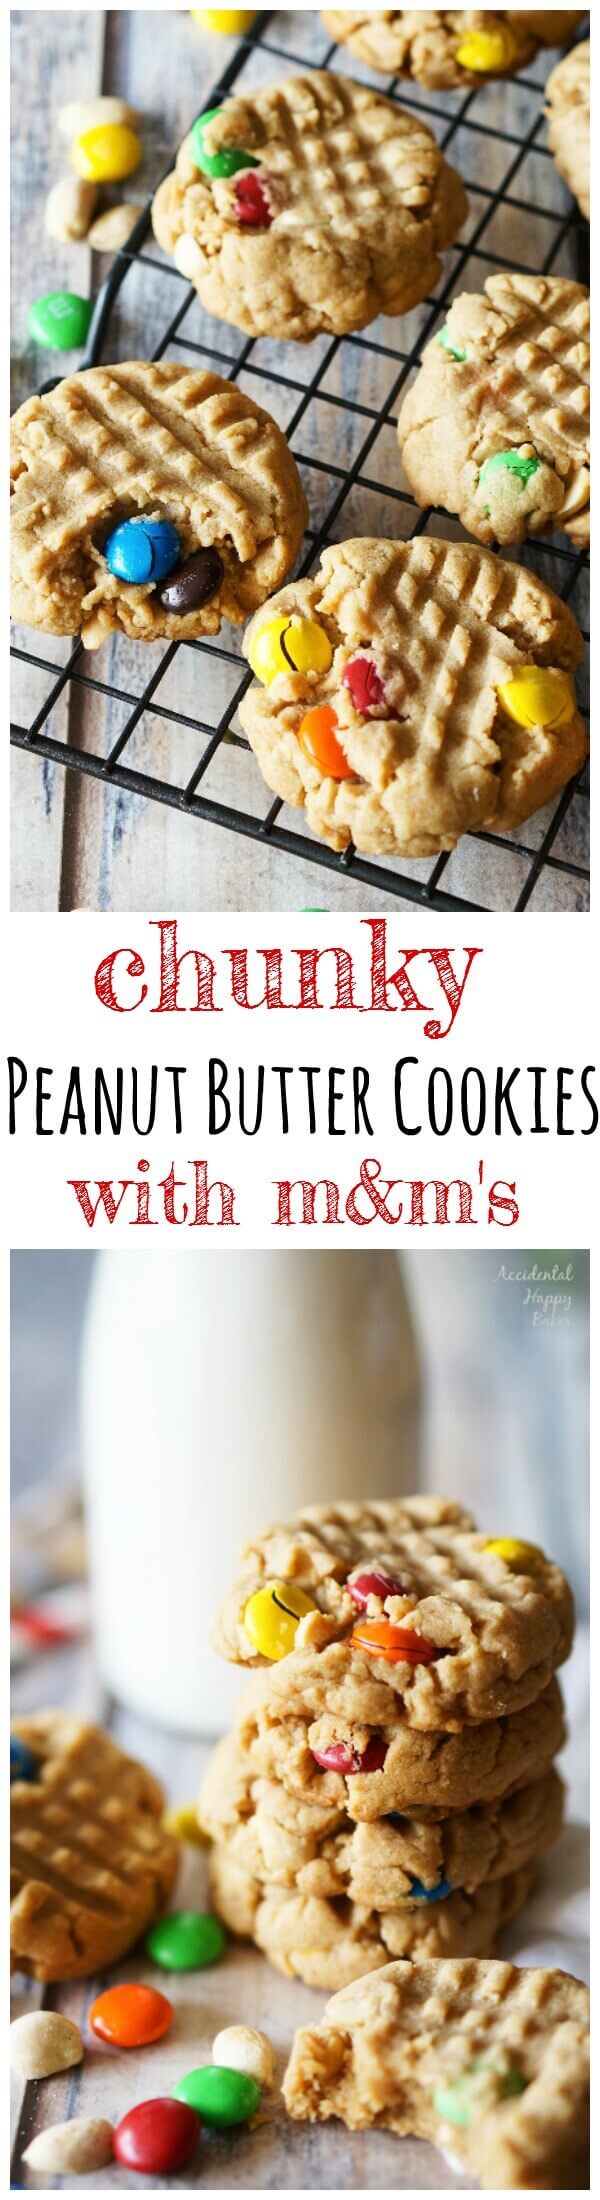 Chunky-Peanut-Butter-Cookies-with-M&M's